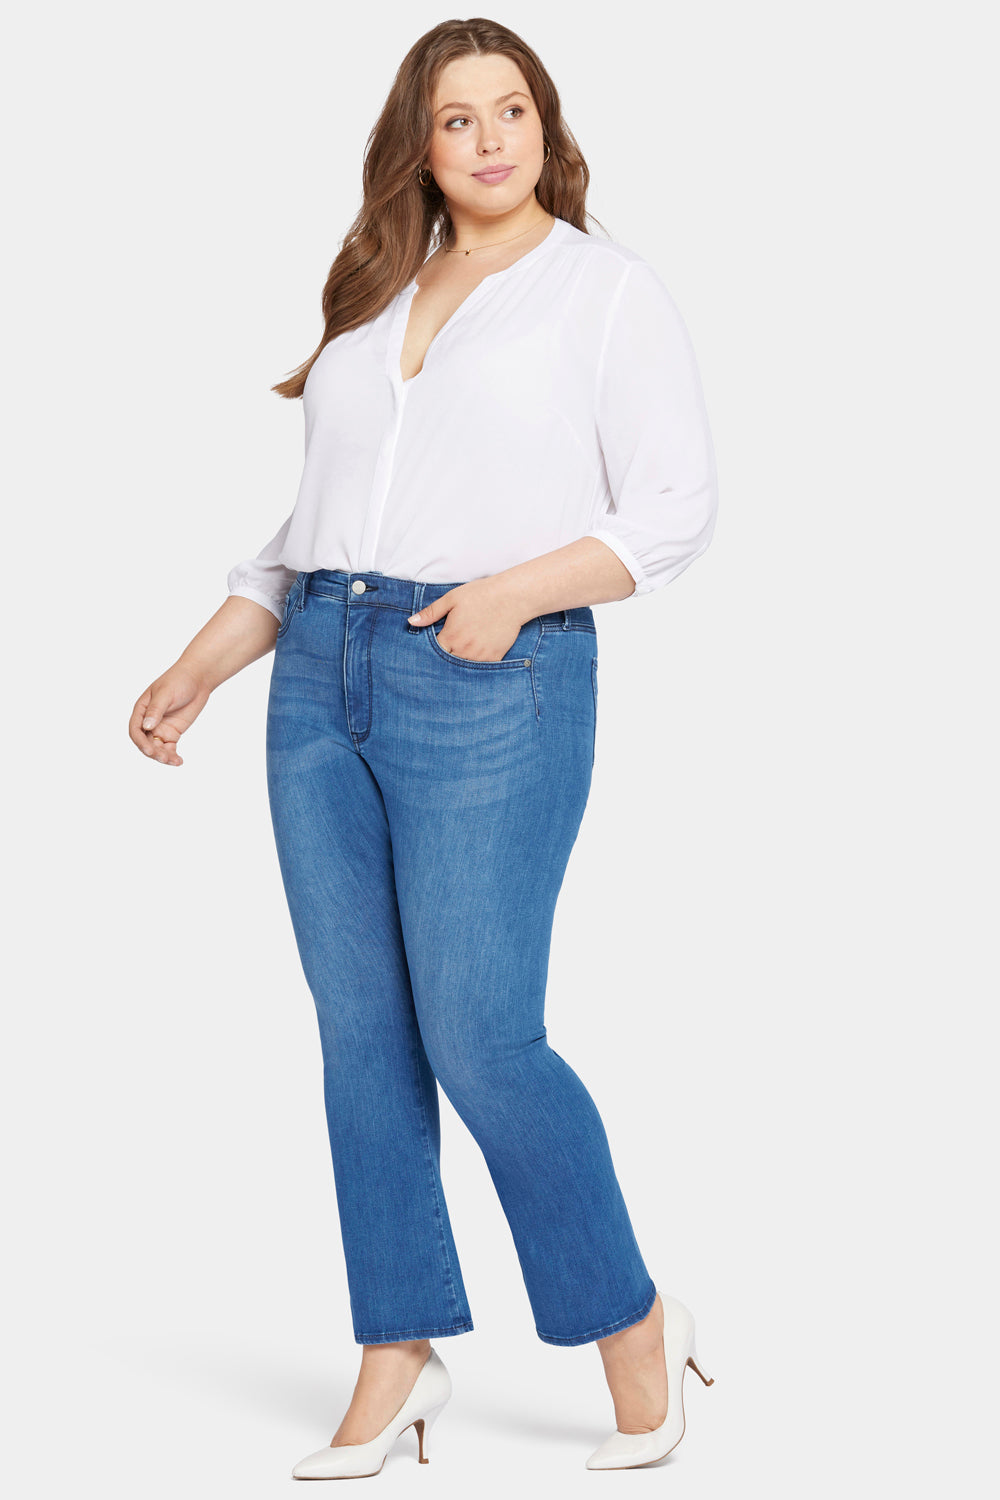 NYDJ Le Silhouette Slim Bootcut Jeans In Petite Plus Size With High Rise - Amour